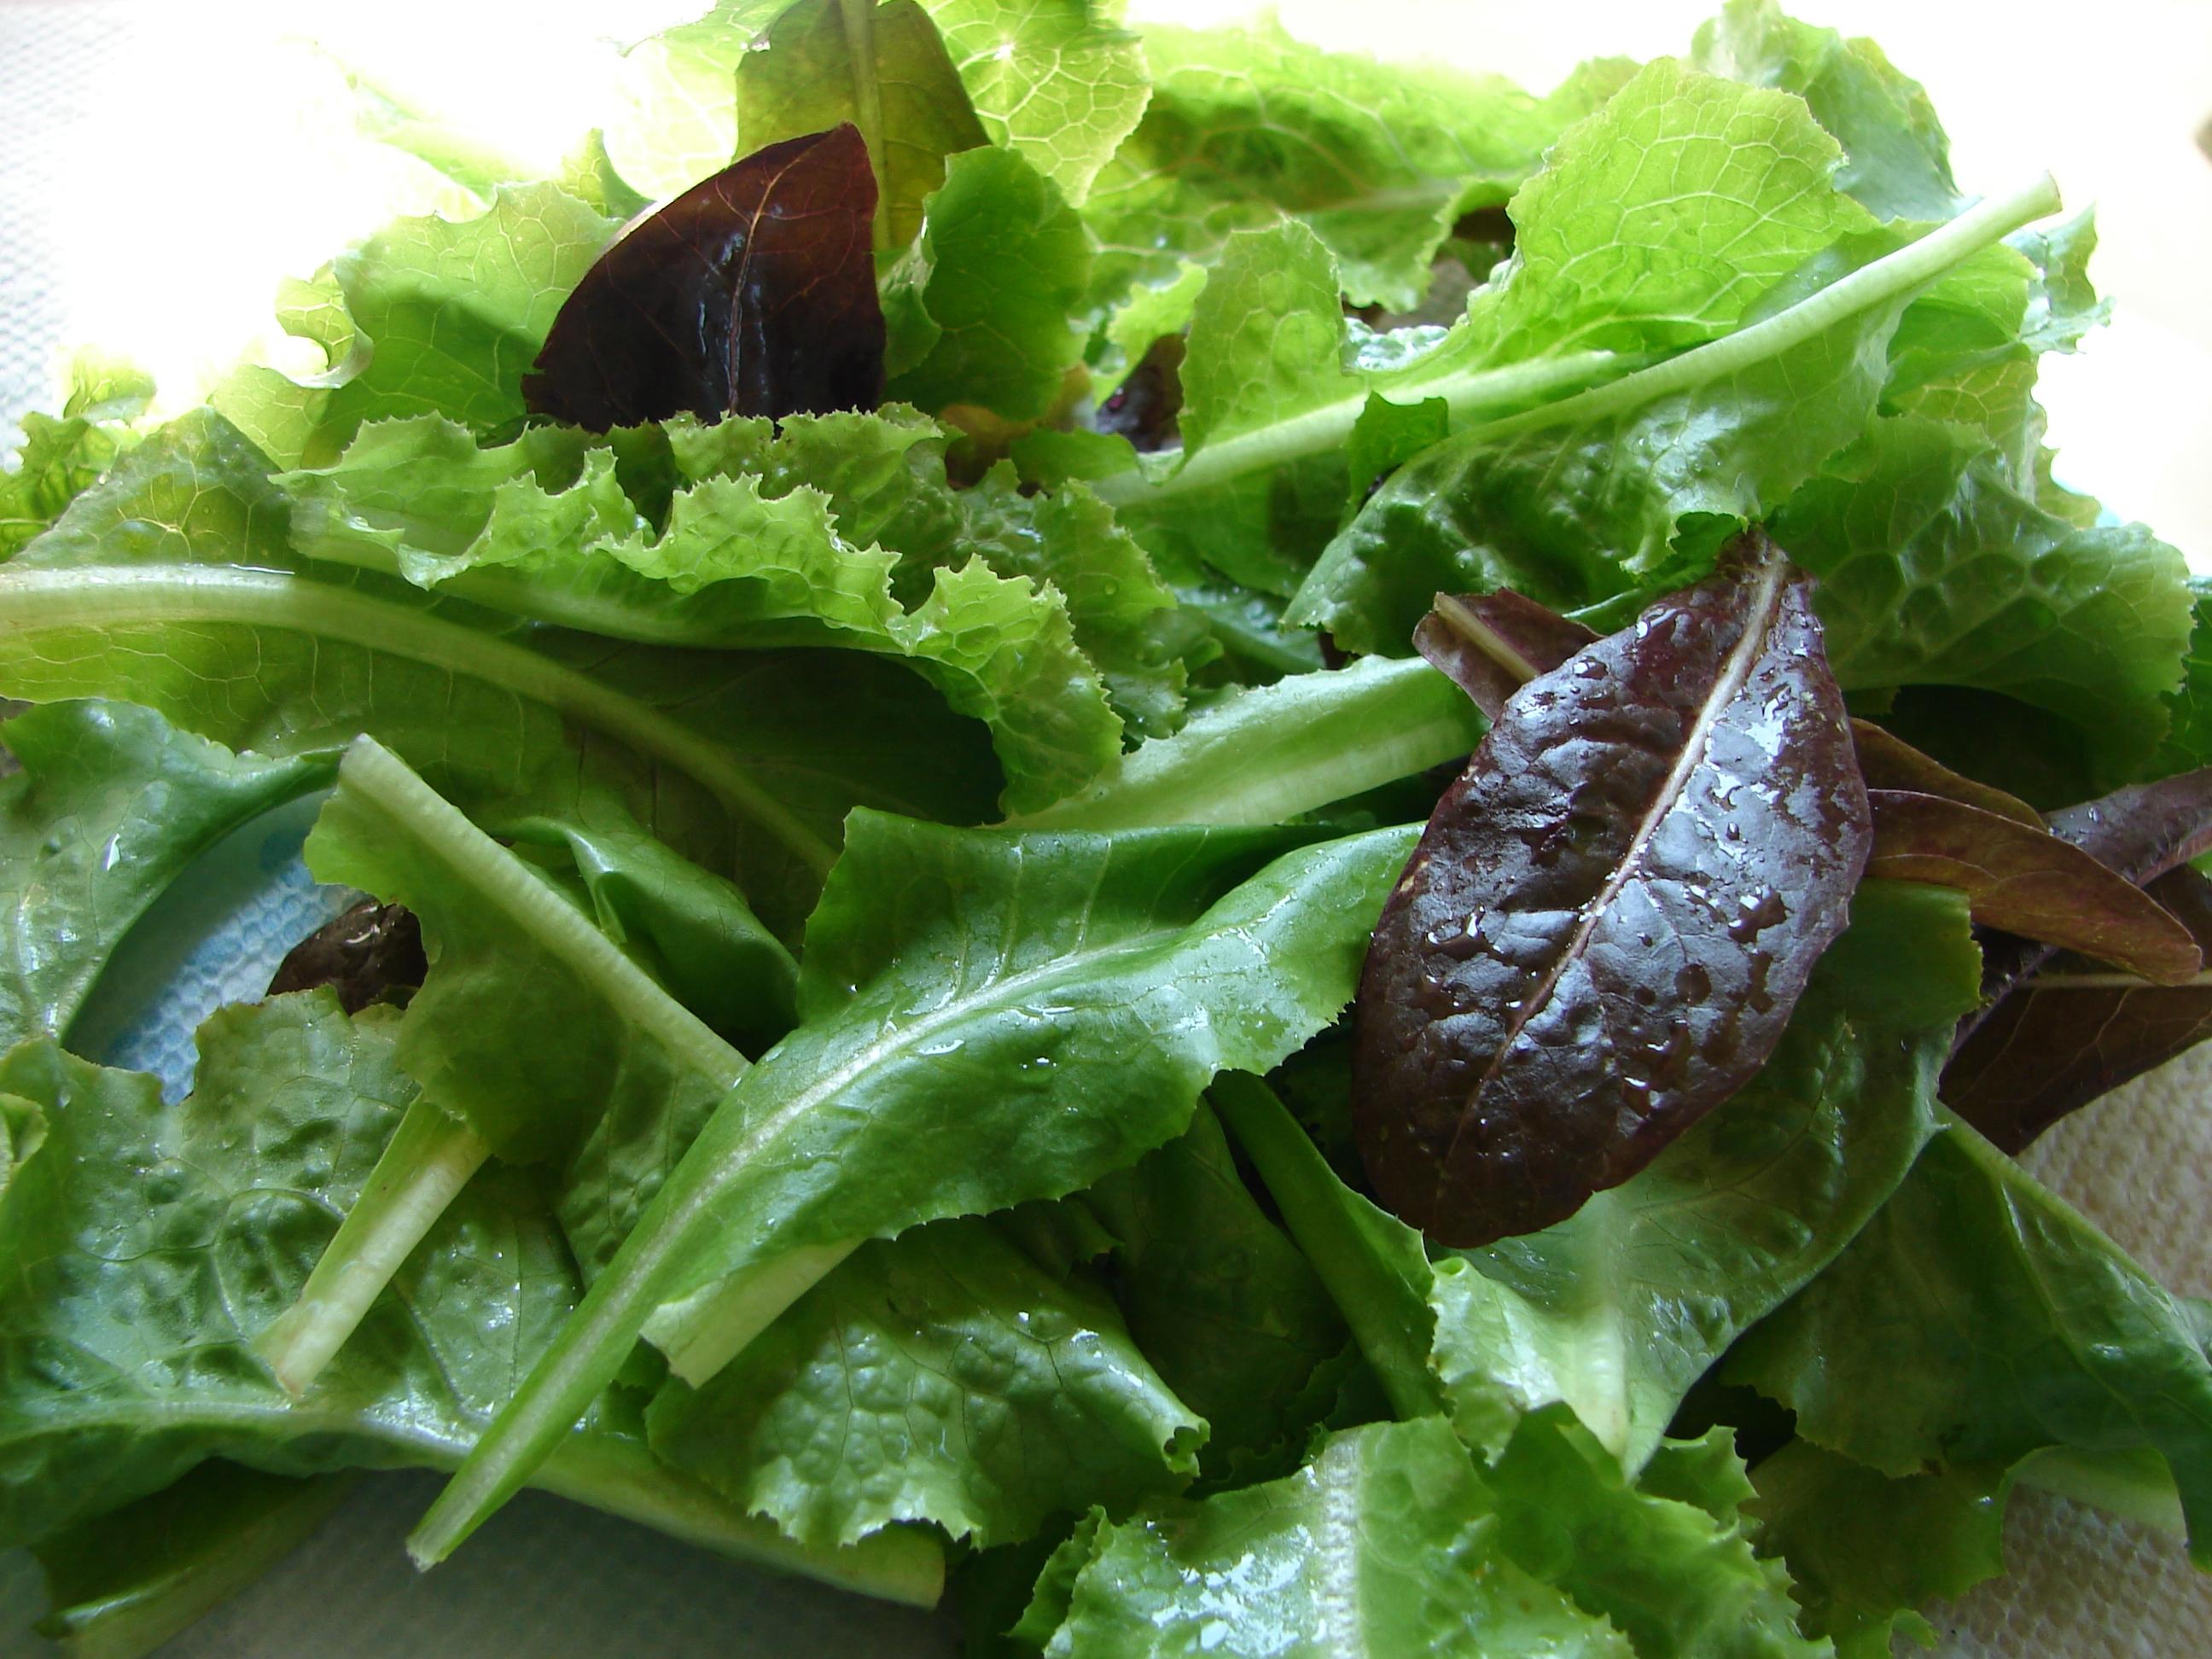 Grow Your Own Salad Mix: Lettuce and More!